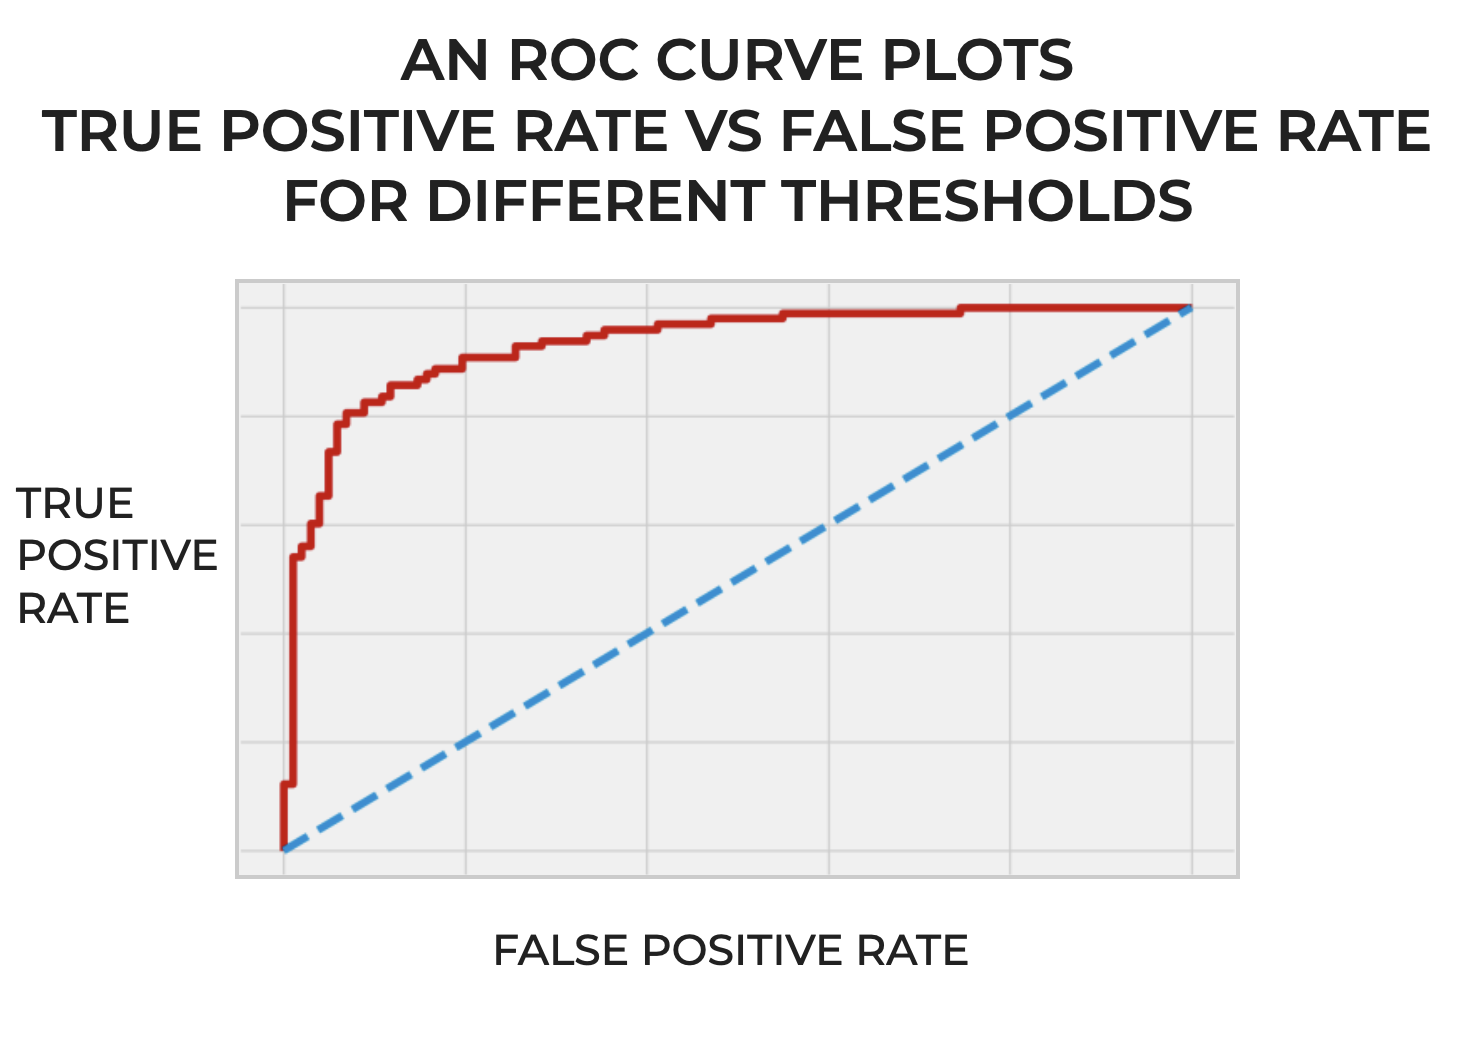 An image of an ROC curve, with a label on the x-axis for False Positive Rate and a label on the y-axis for True Positive-Rate.